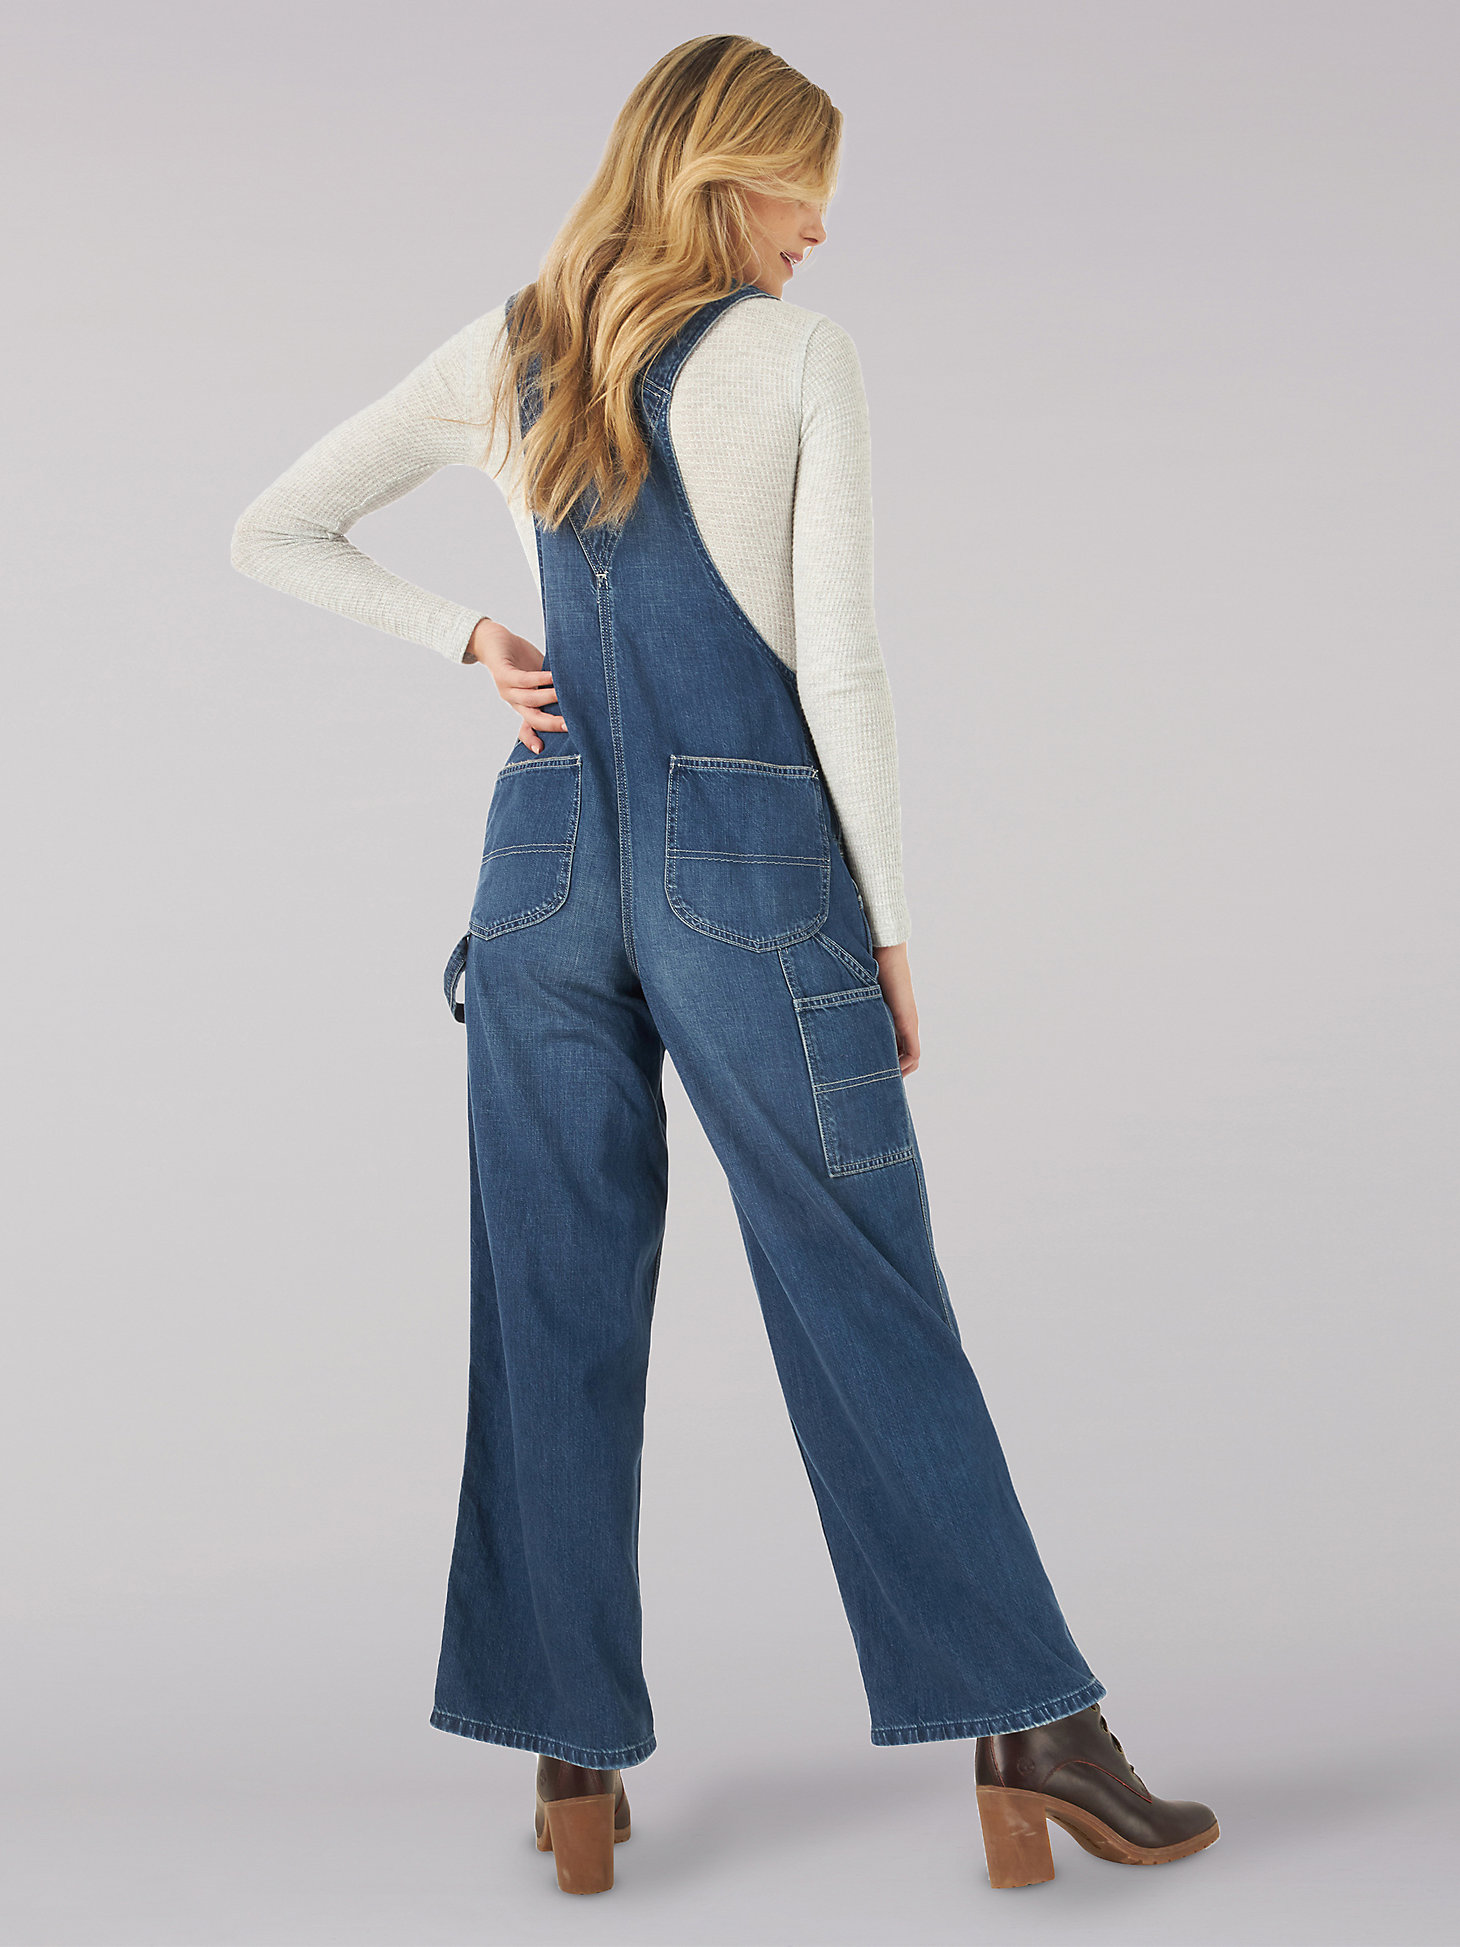 Women's Vintage Modern Relaxed Overall in Kansas Fade alternative view 1